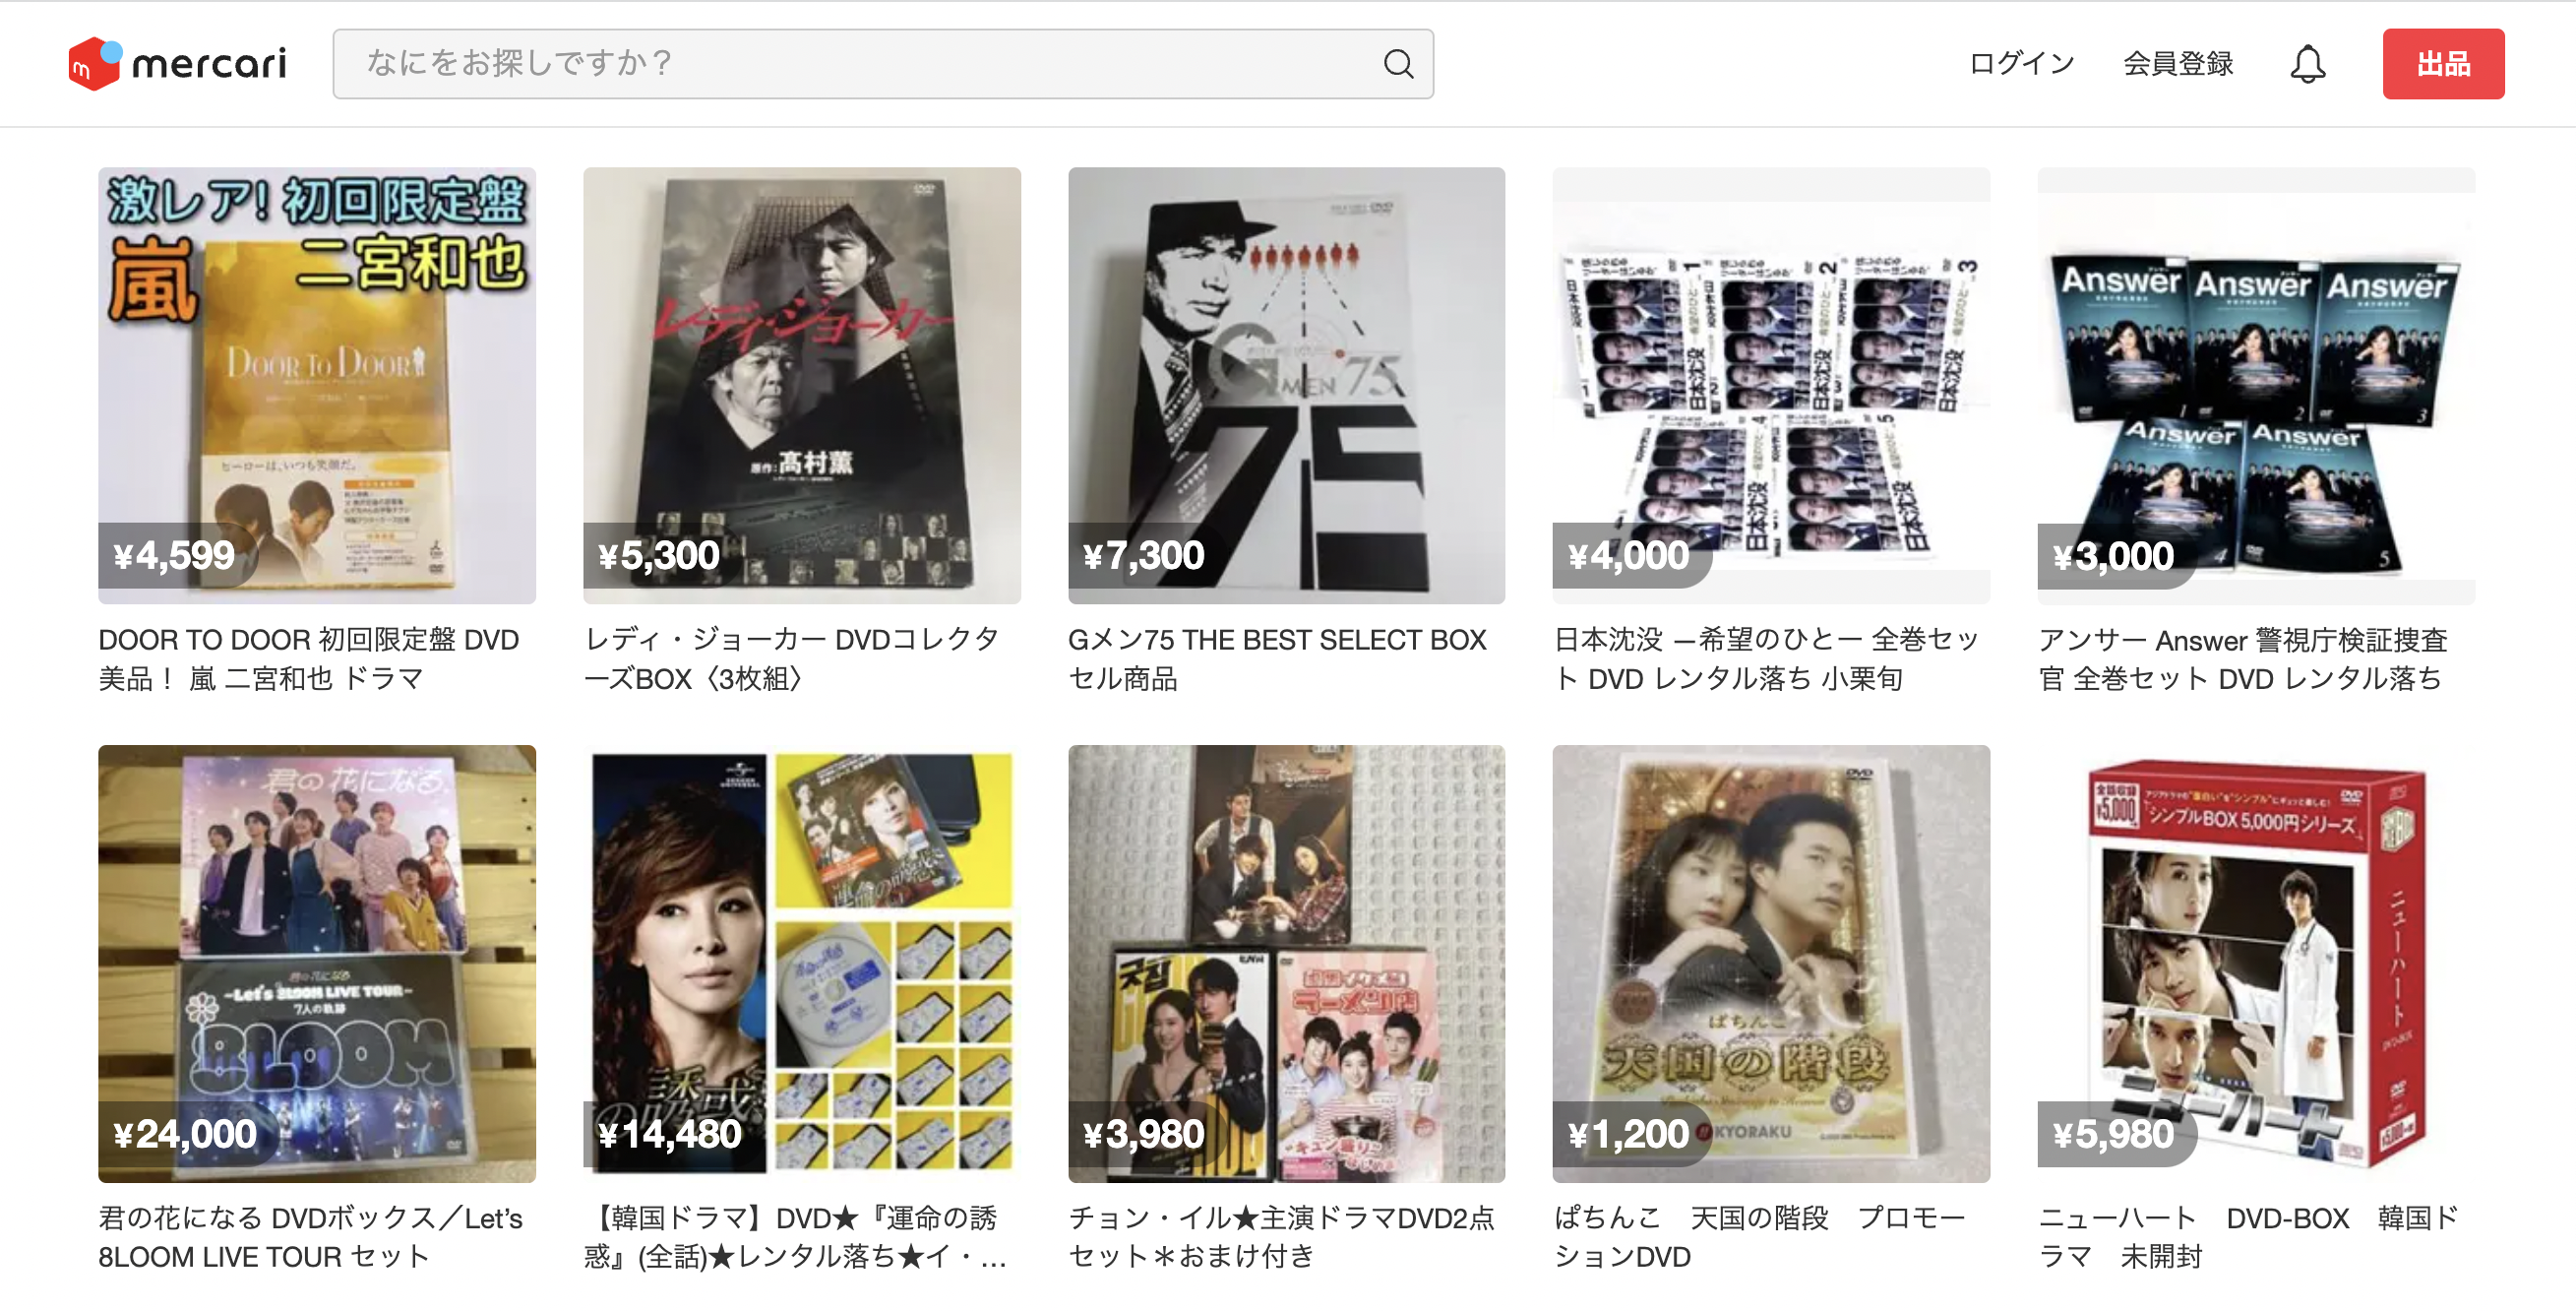 Mercari, an online marketplace where albums can be purchased and shipped within Japan